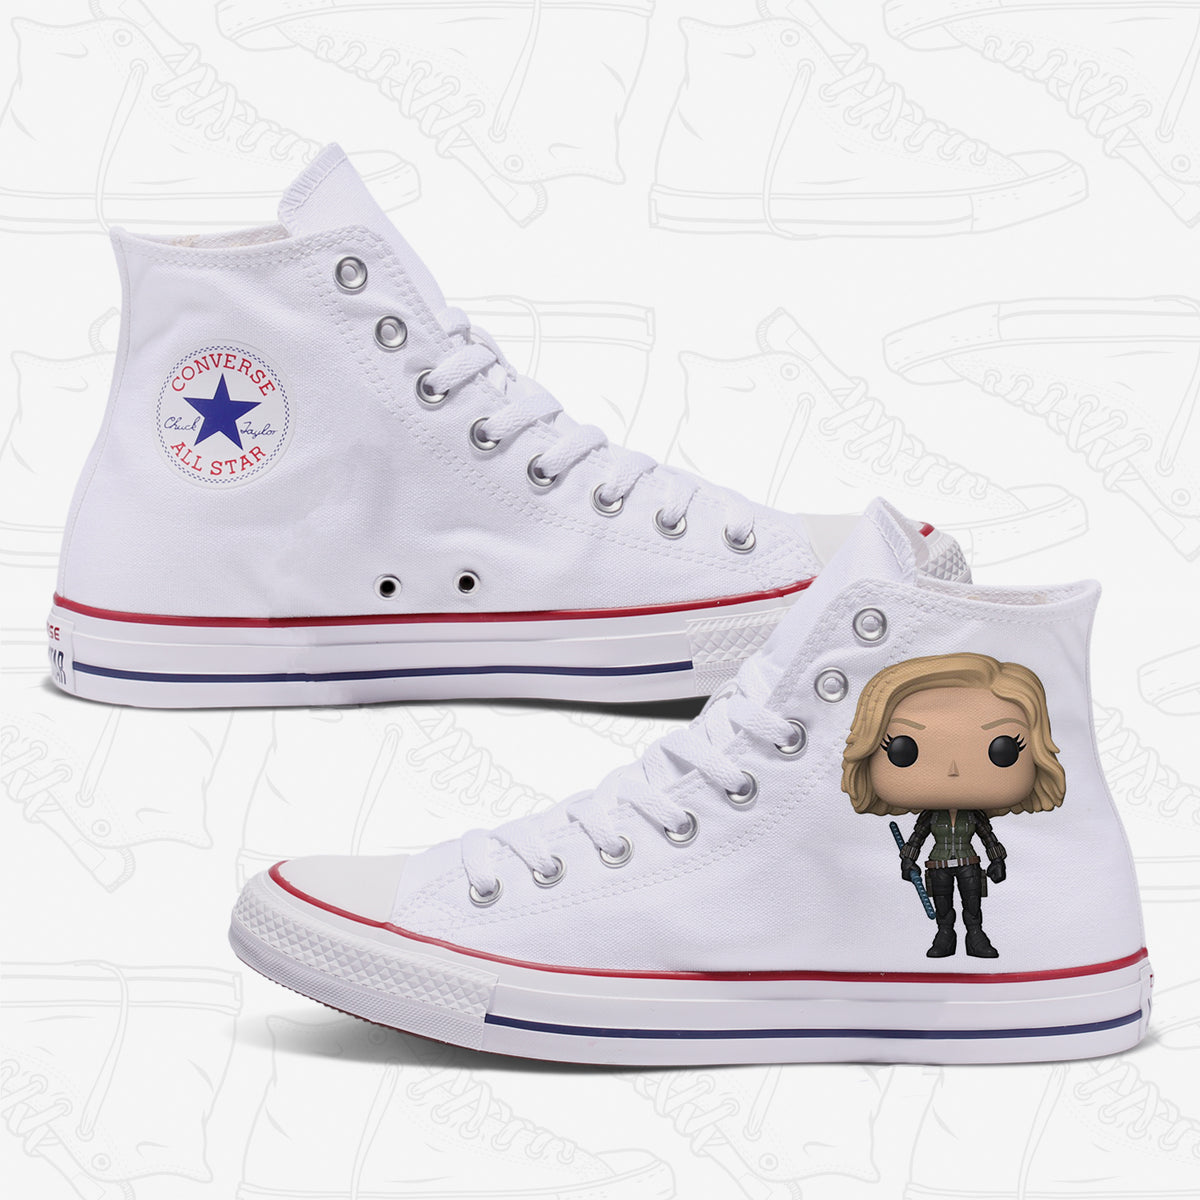 Black Widow Adult Converse Shoes